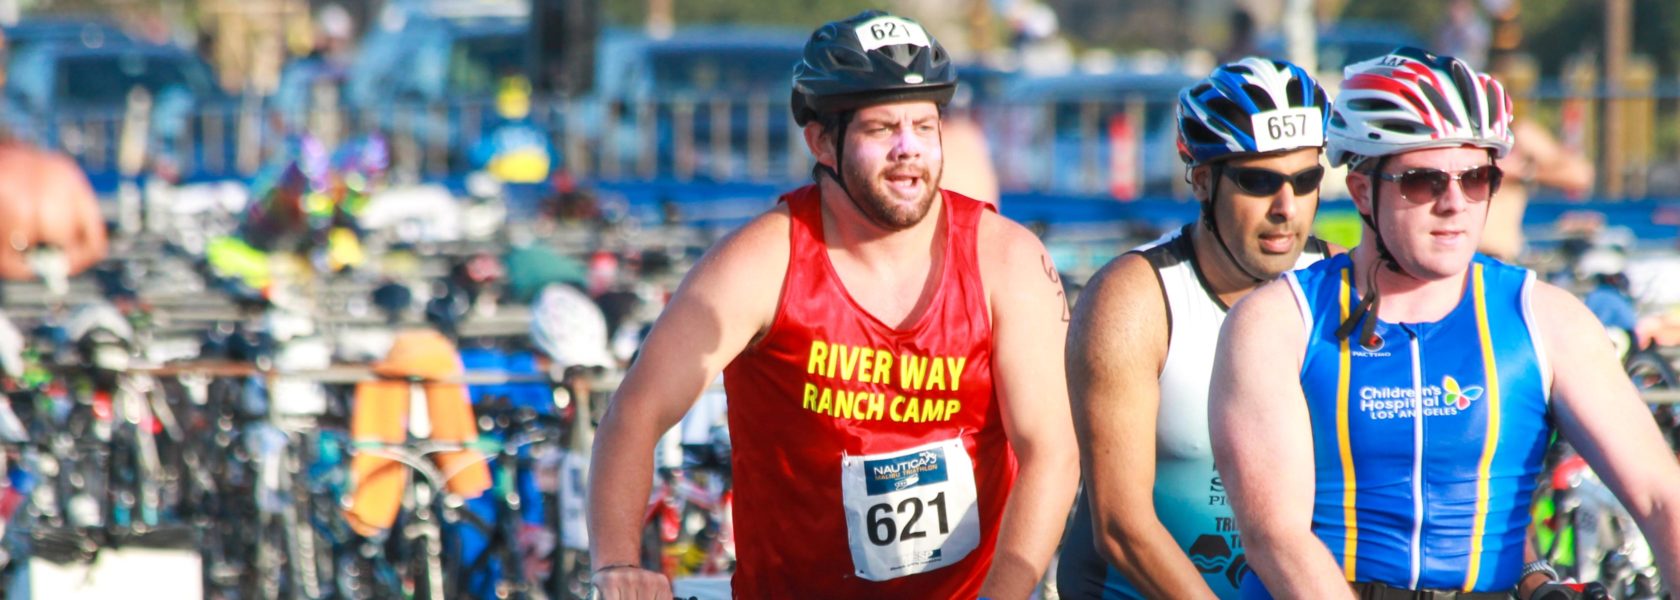 A river way ranch camp staff member participating in a triathlon.